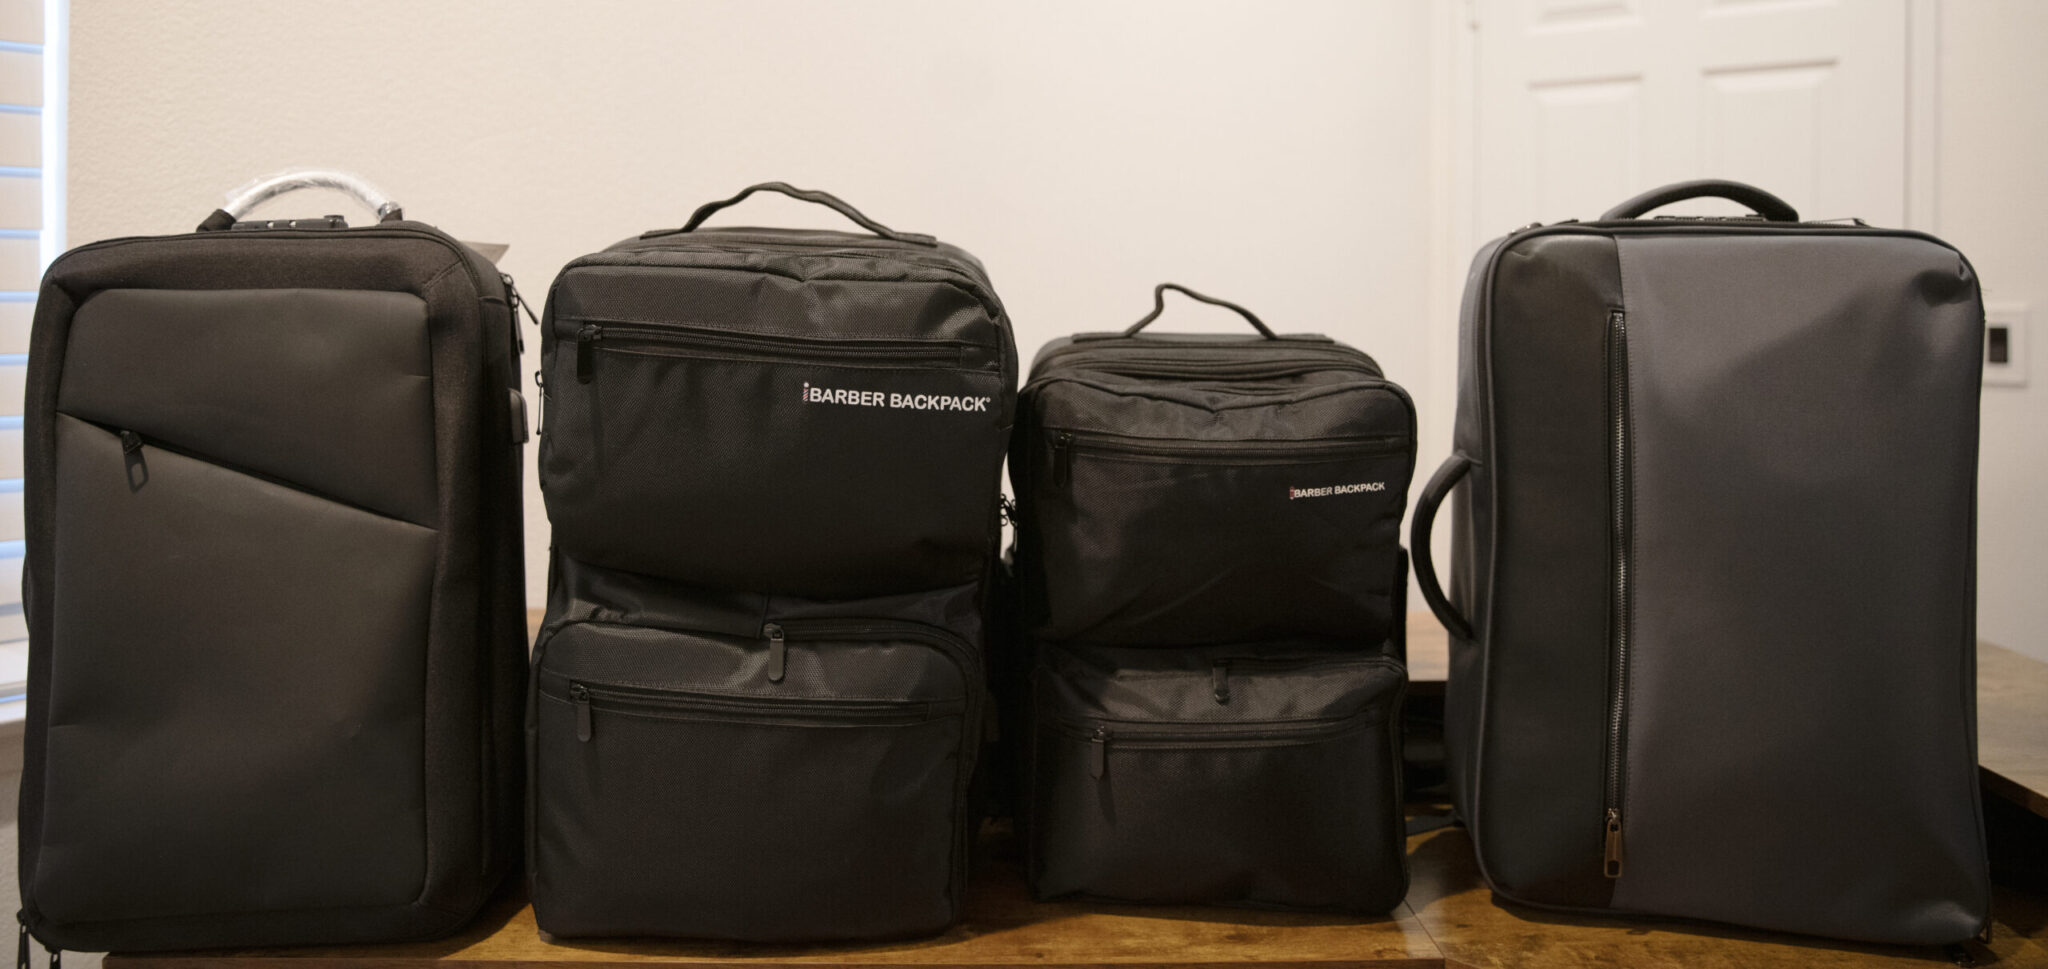 barber backpack bags scaled